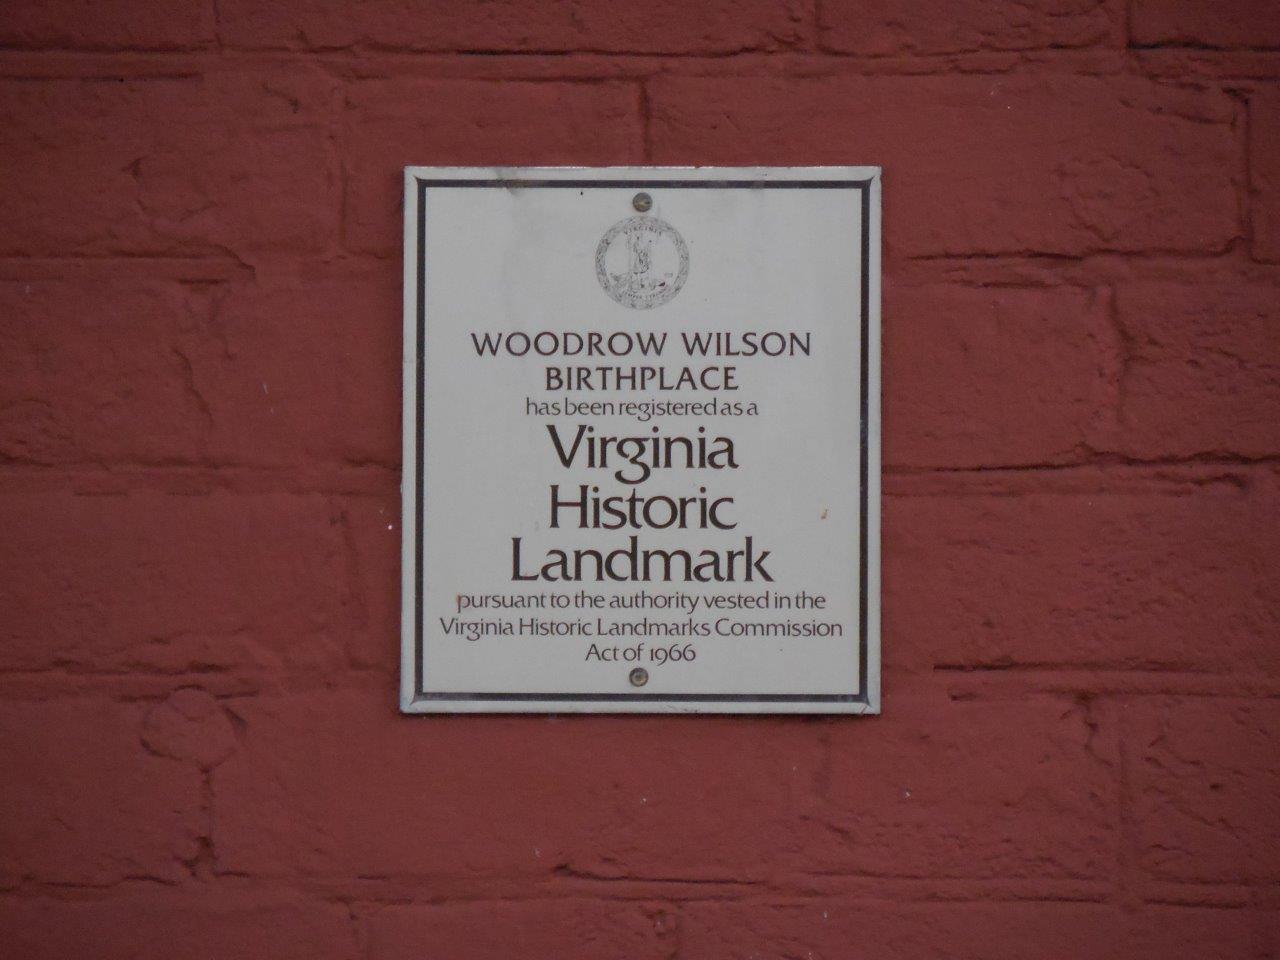 Woodrow Wilson birthplace state historical marker